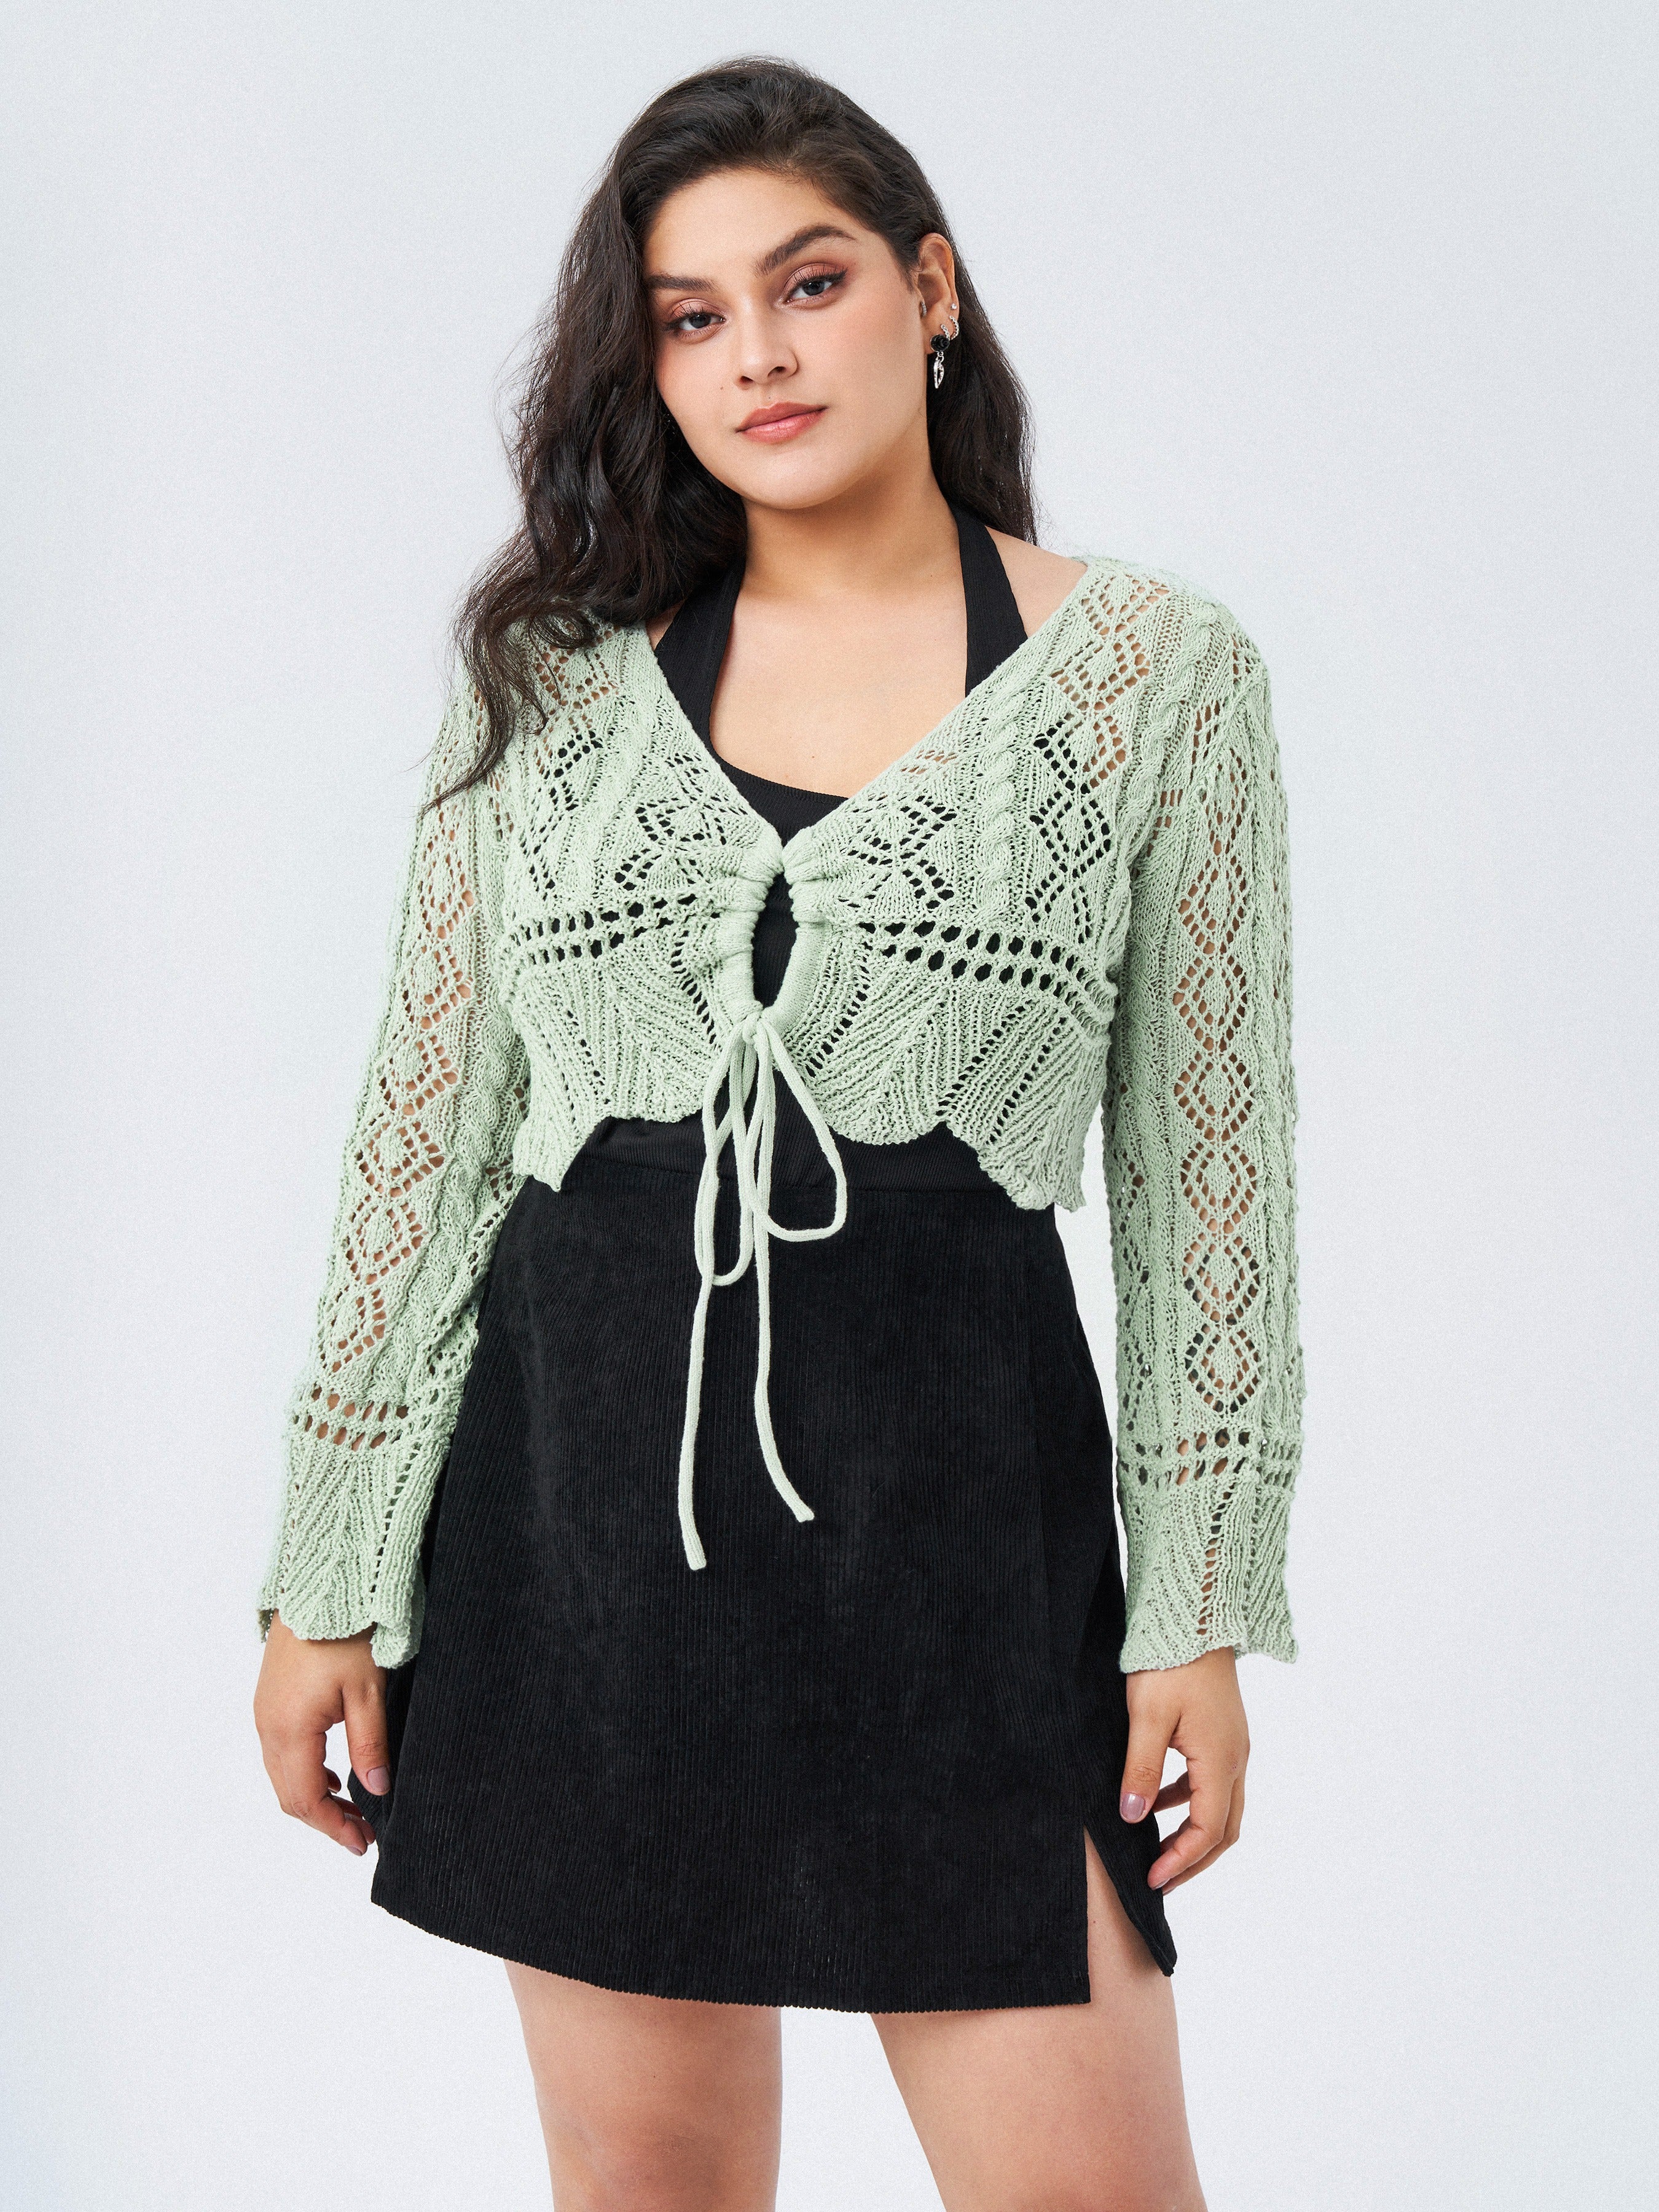 model wearing a mint green cropped long-sleeve crochet cardigan with a tie front detail